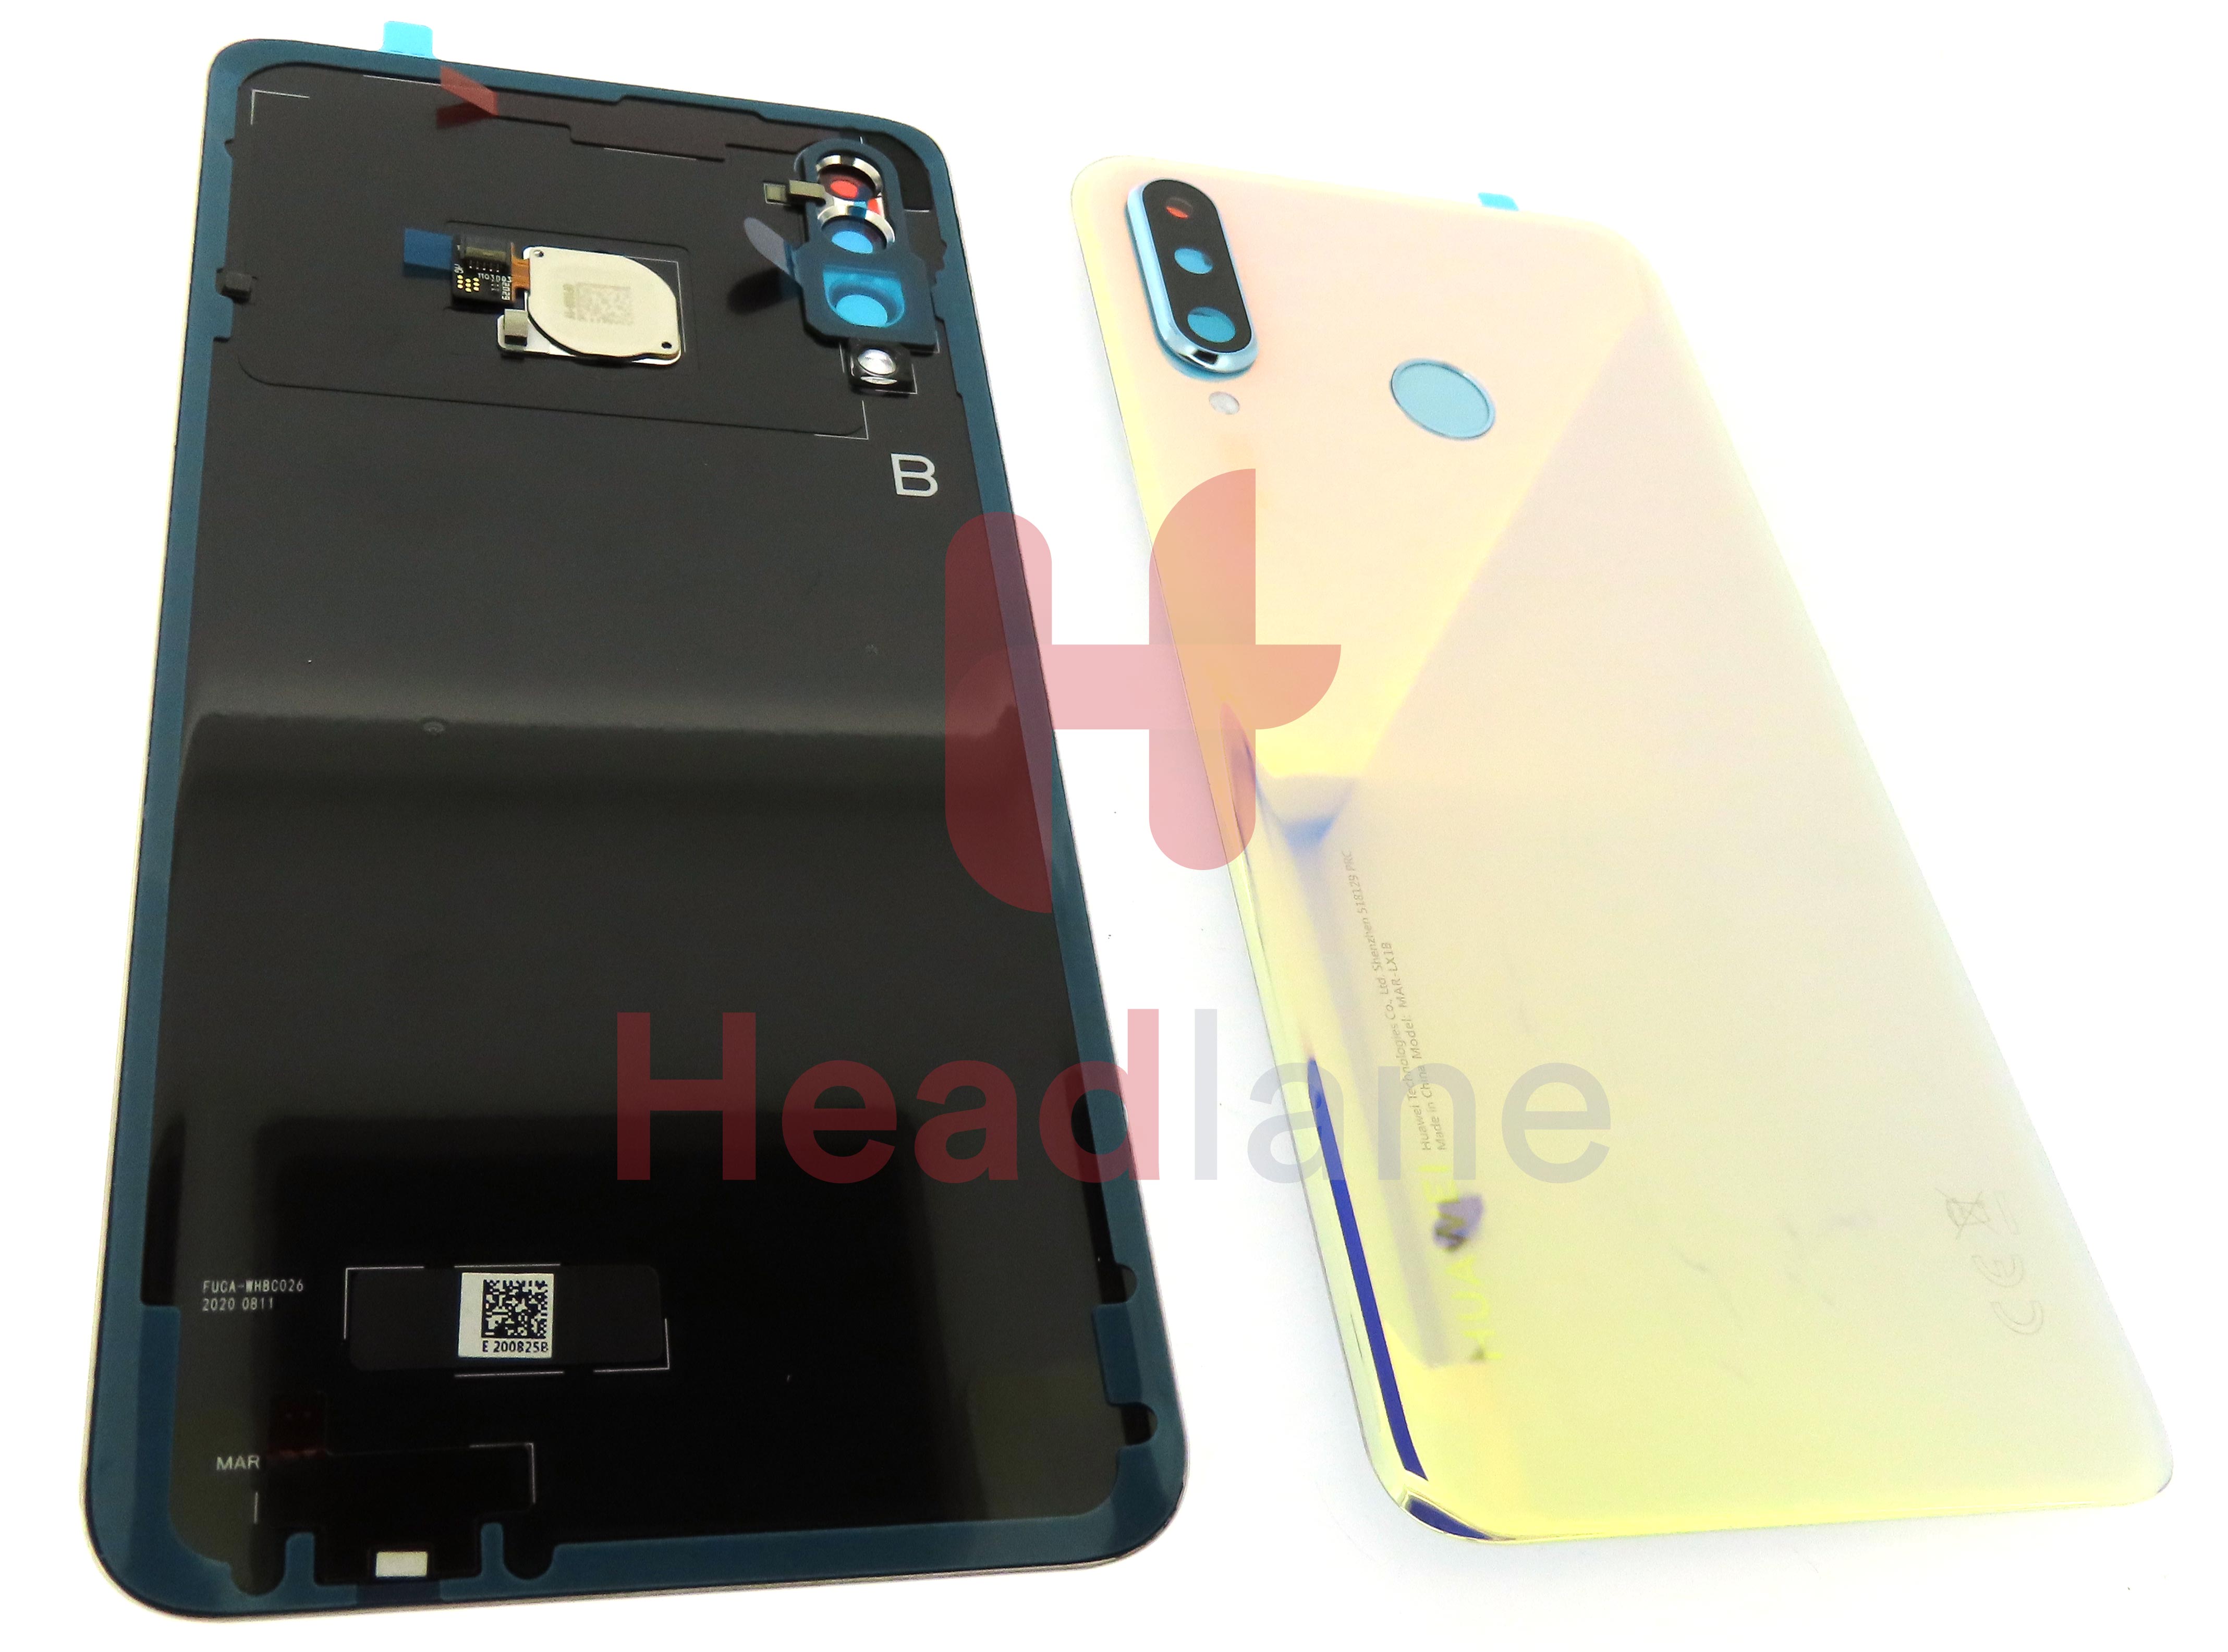 Huawei P30 Lite (New Edition) Back / Battery Cover - Breathing Crystal (MAR-LX1B 48MP Rear Camera)